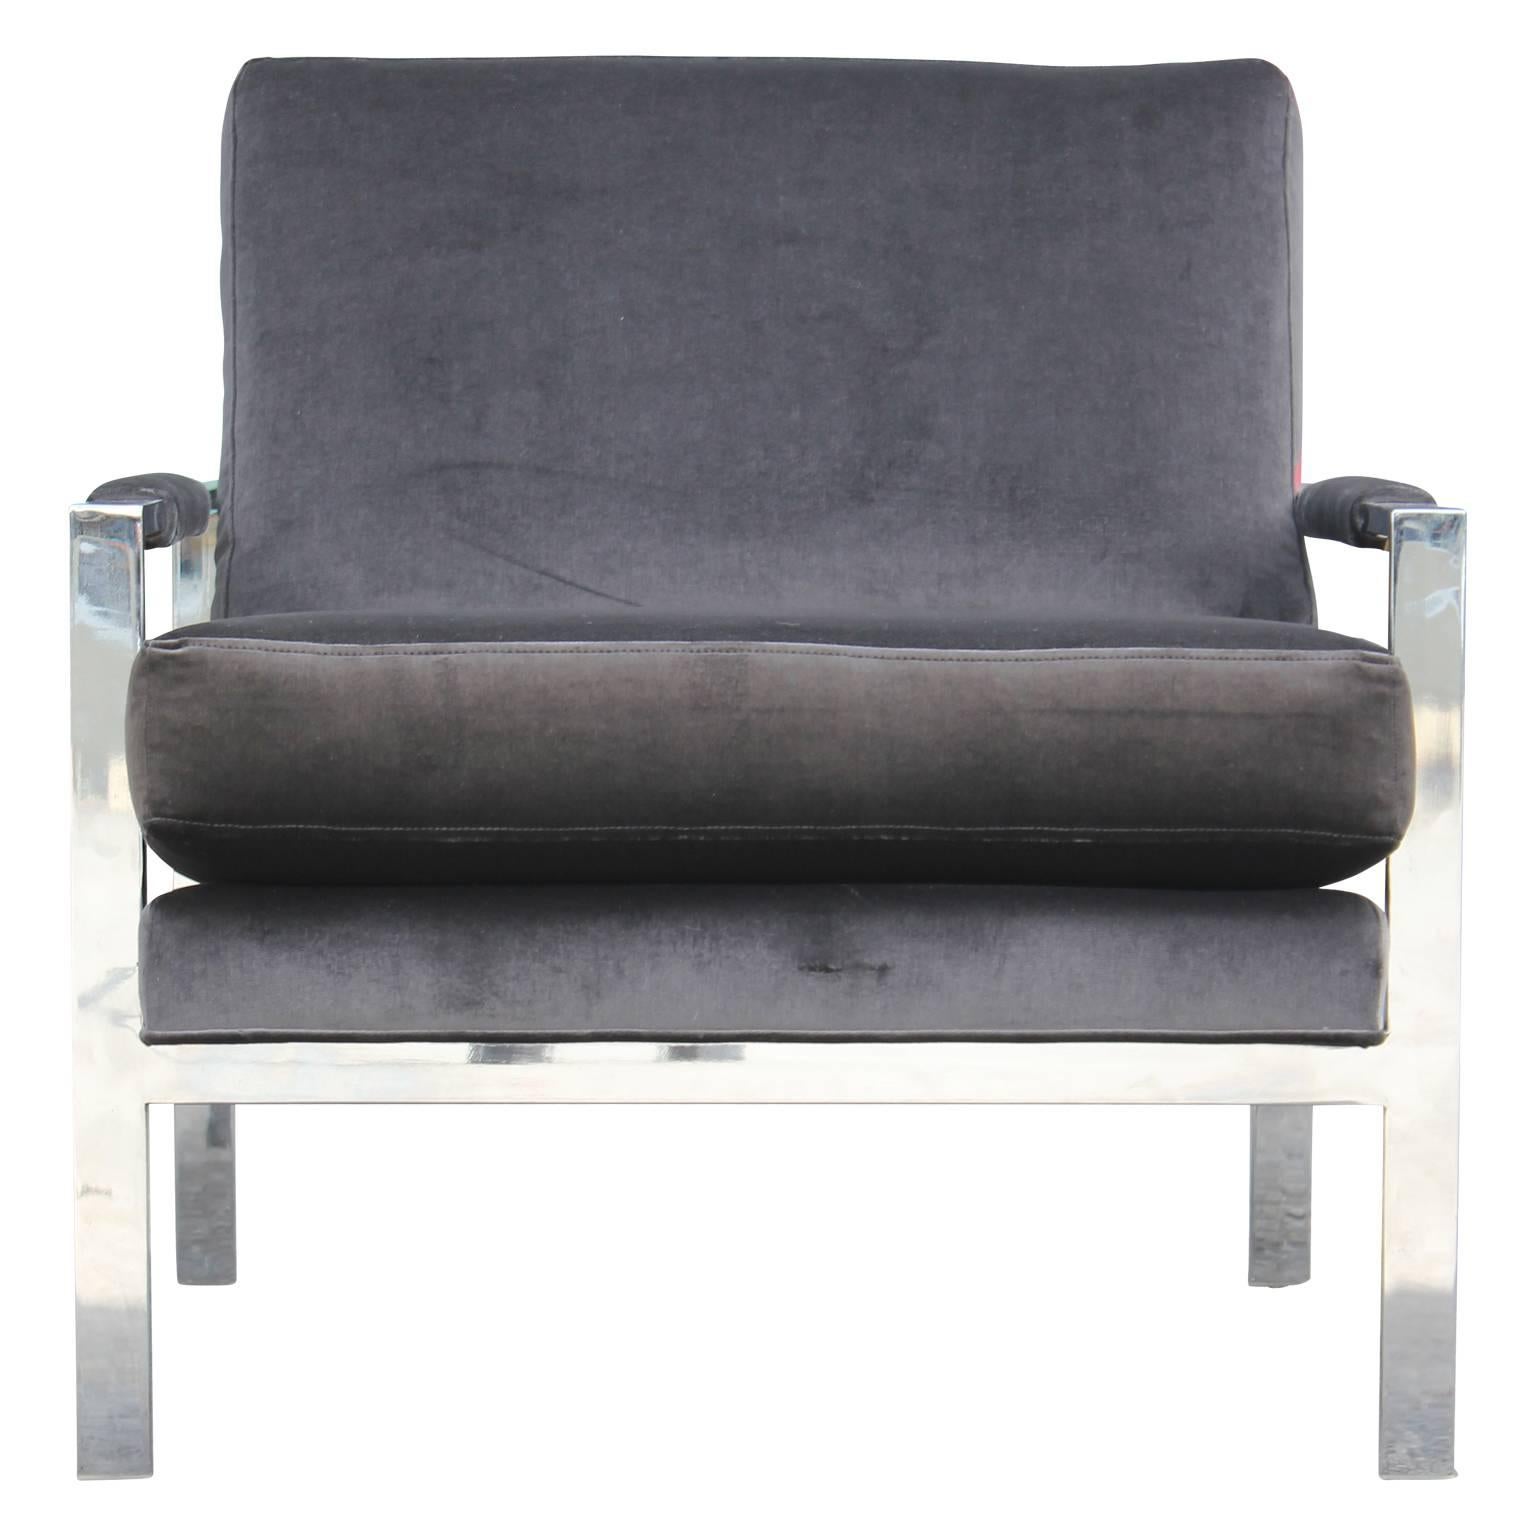 Modern chrome Milo Baughman lounge chair freshly and expertly upholstered in a deep grey velvet.  Perfect for any modern or mid-mod home as an accent or side chair. 